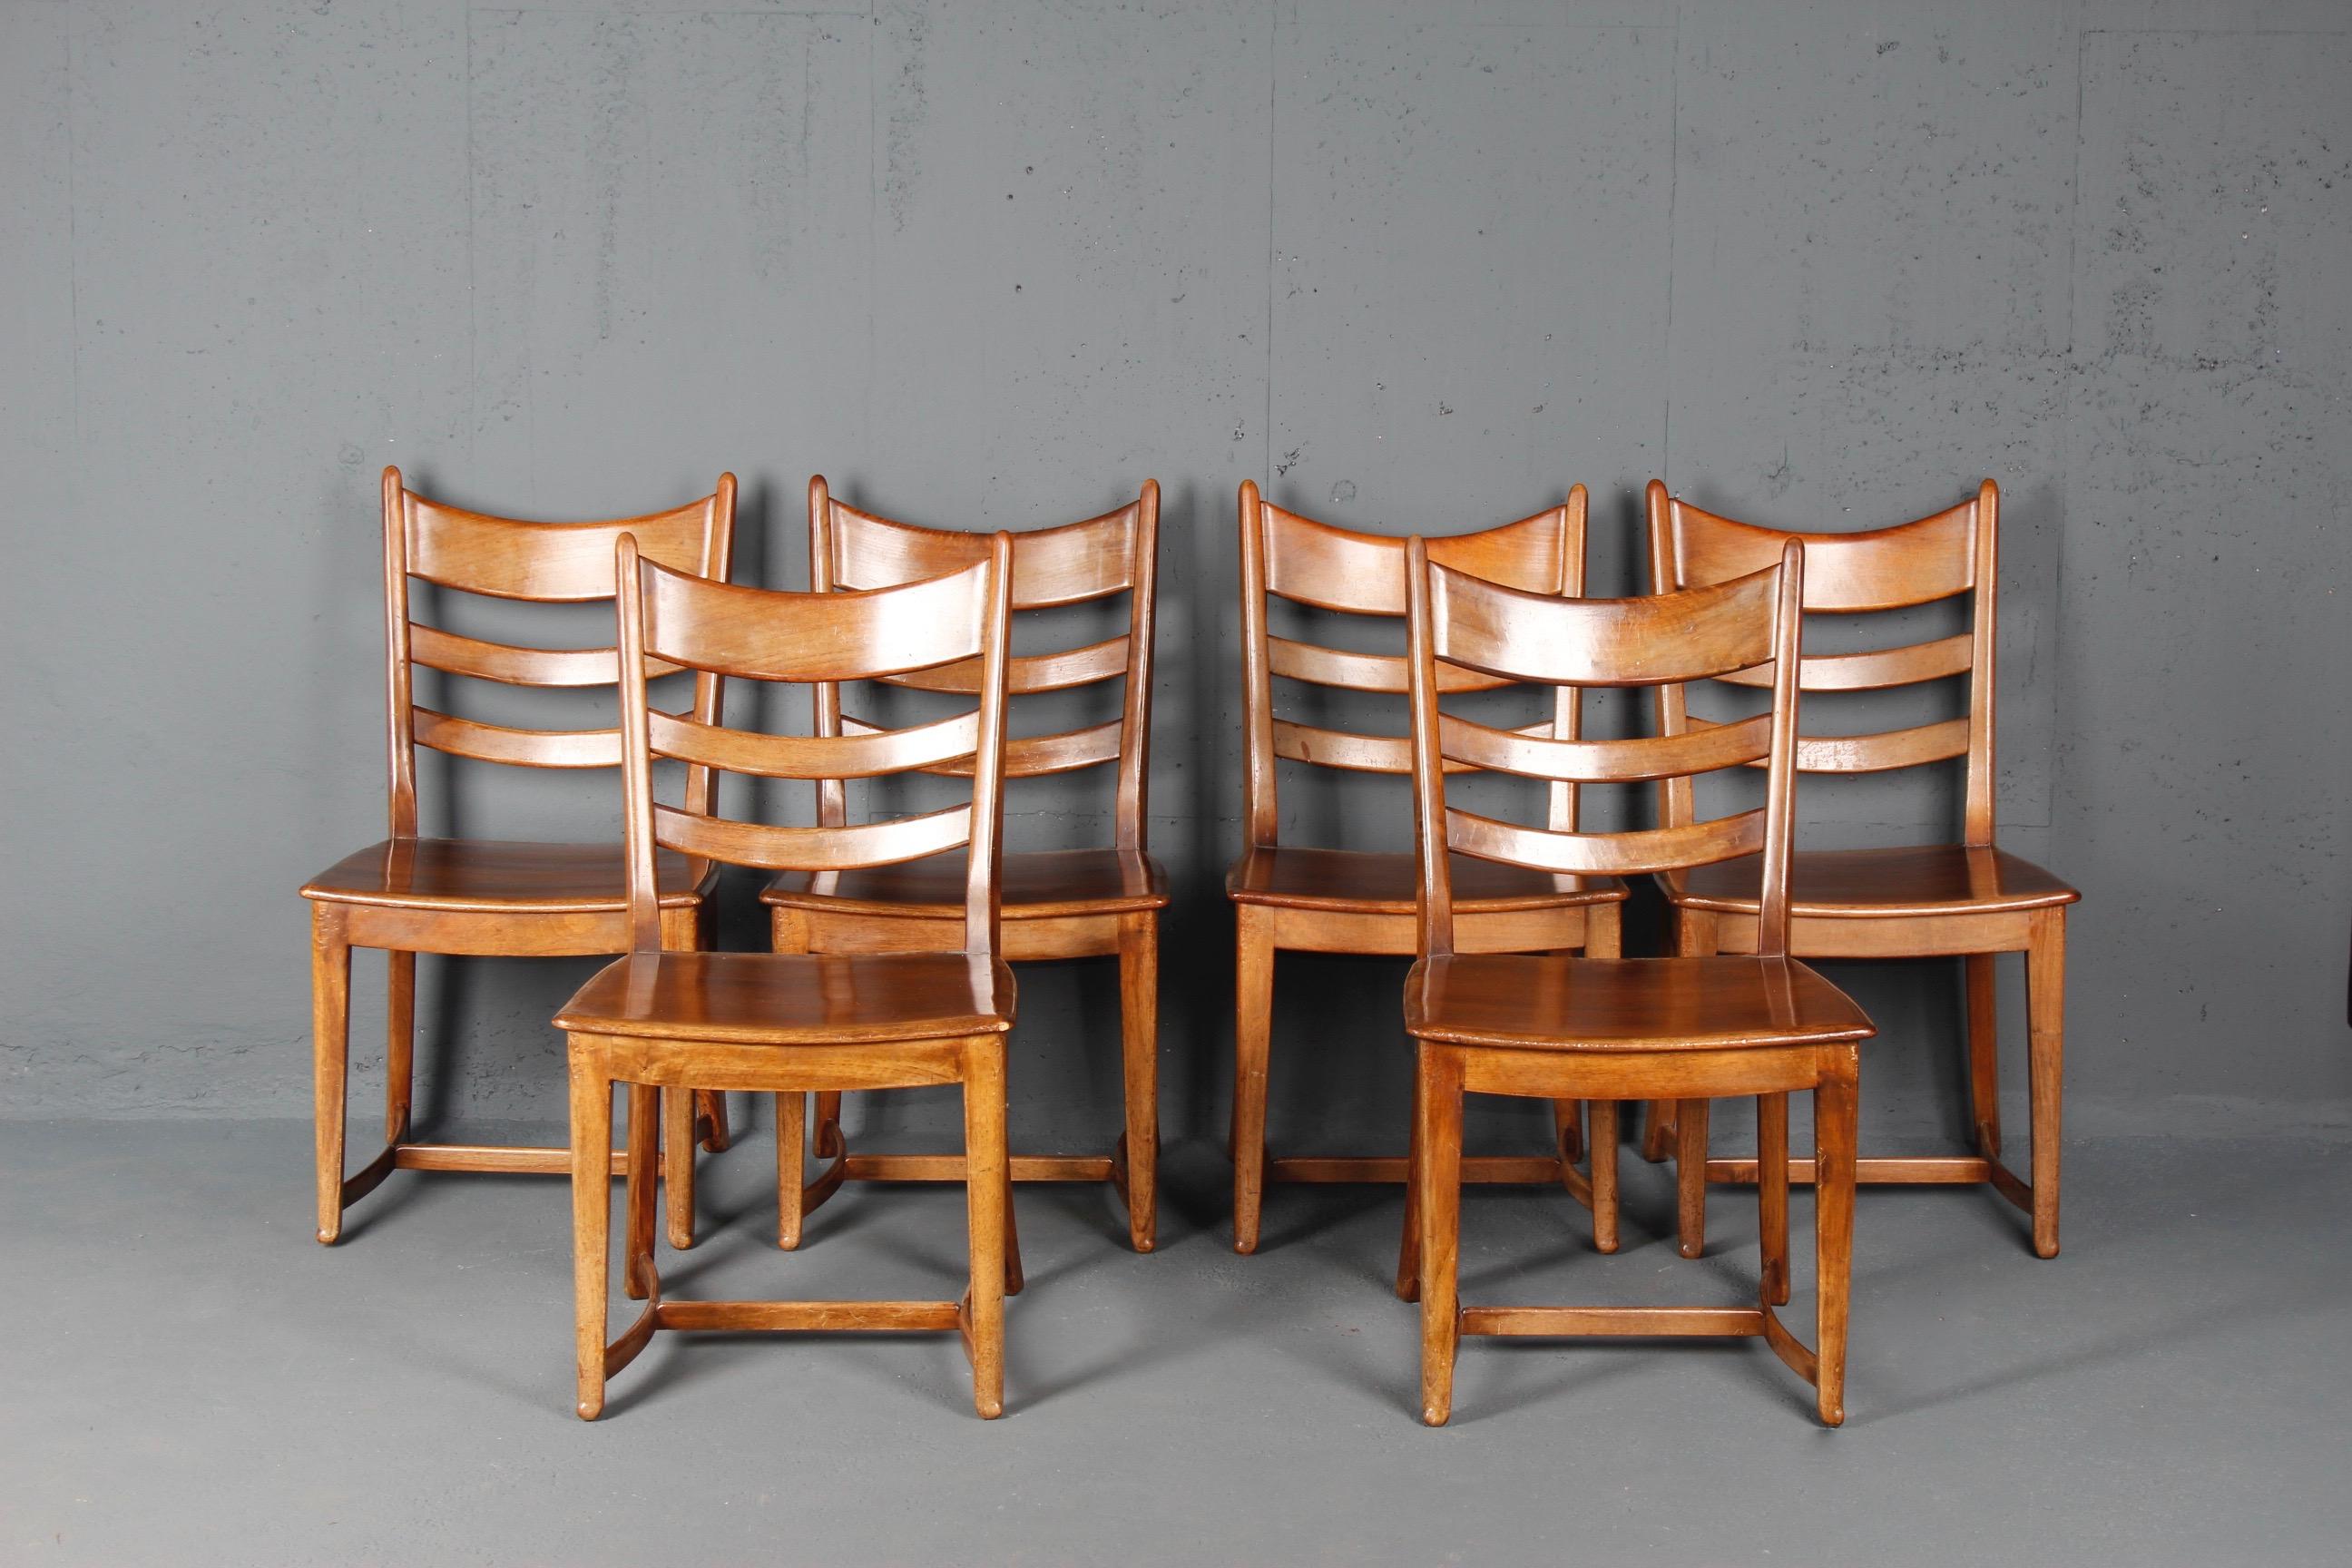 Swiss Set of 6 Franz Xaver Sproll Chairs